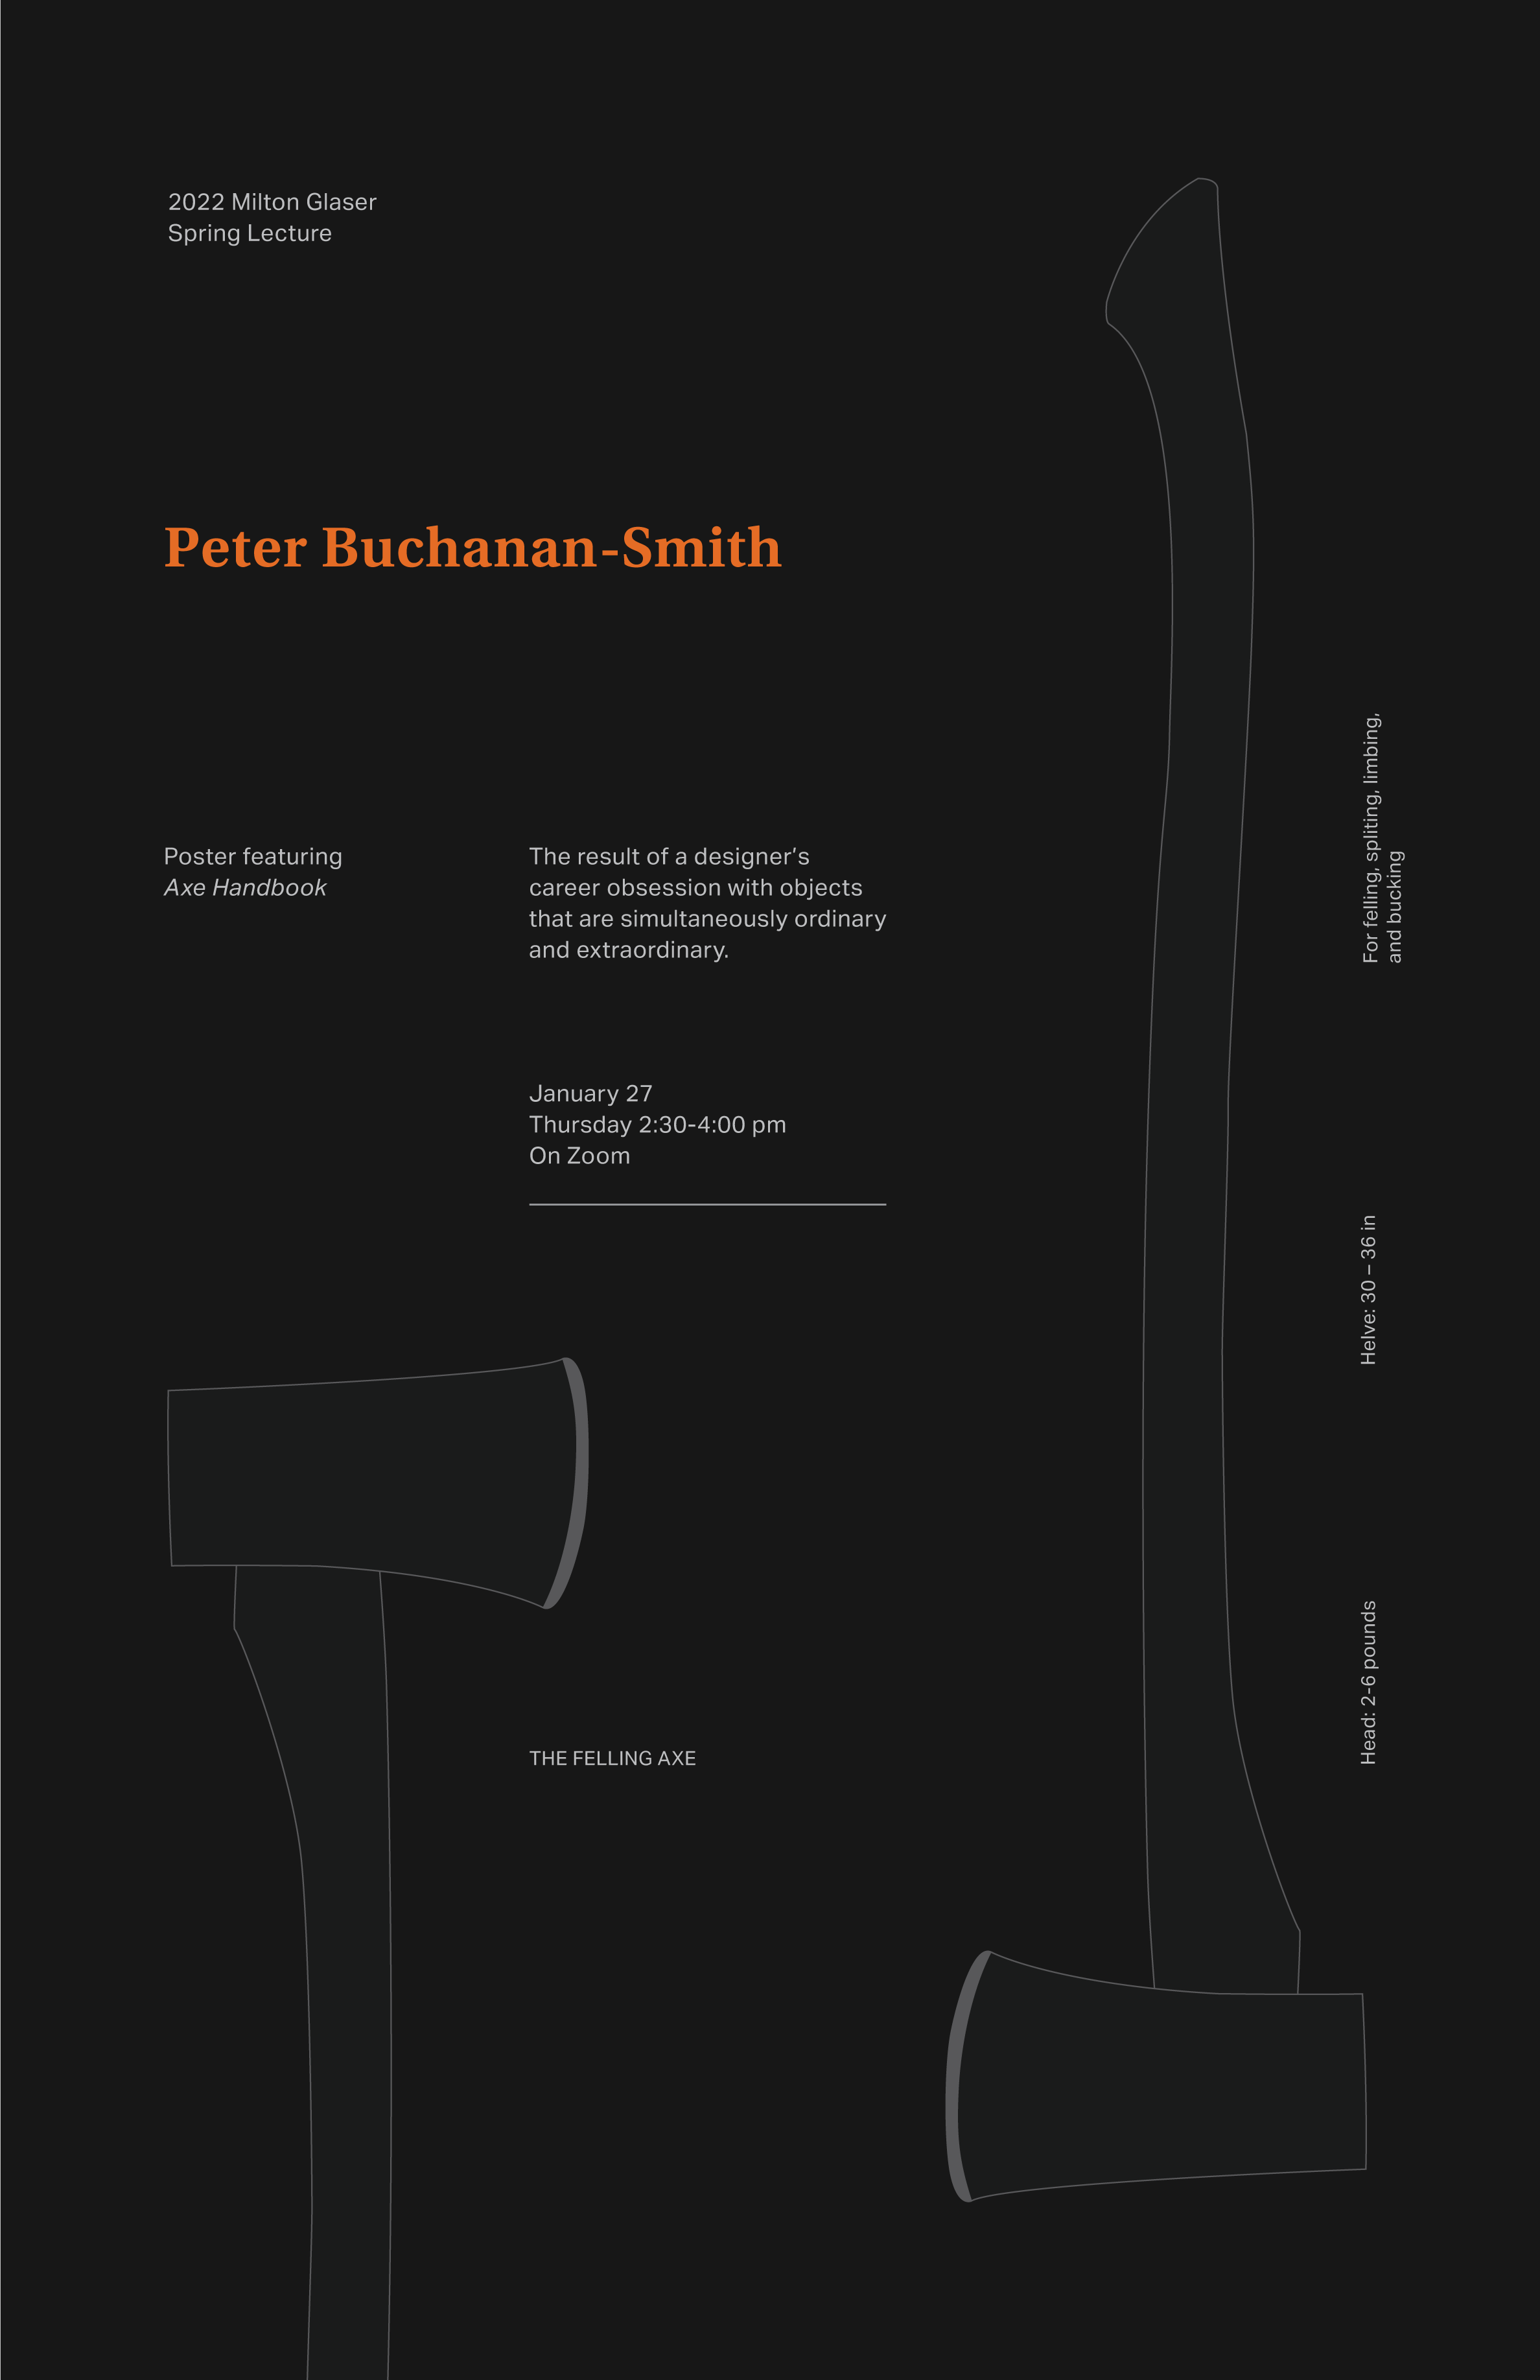 Vertical Poster of 2022 Milton Glaser Guest Lecture Series with Peter Buchanan-Smith, January 27, from 2:30pm to 4pm on zoom. Orange title, white text on black background with dark grey illustrations of axes